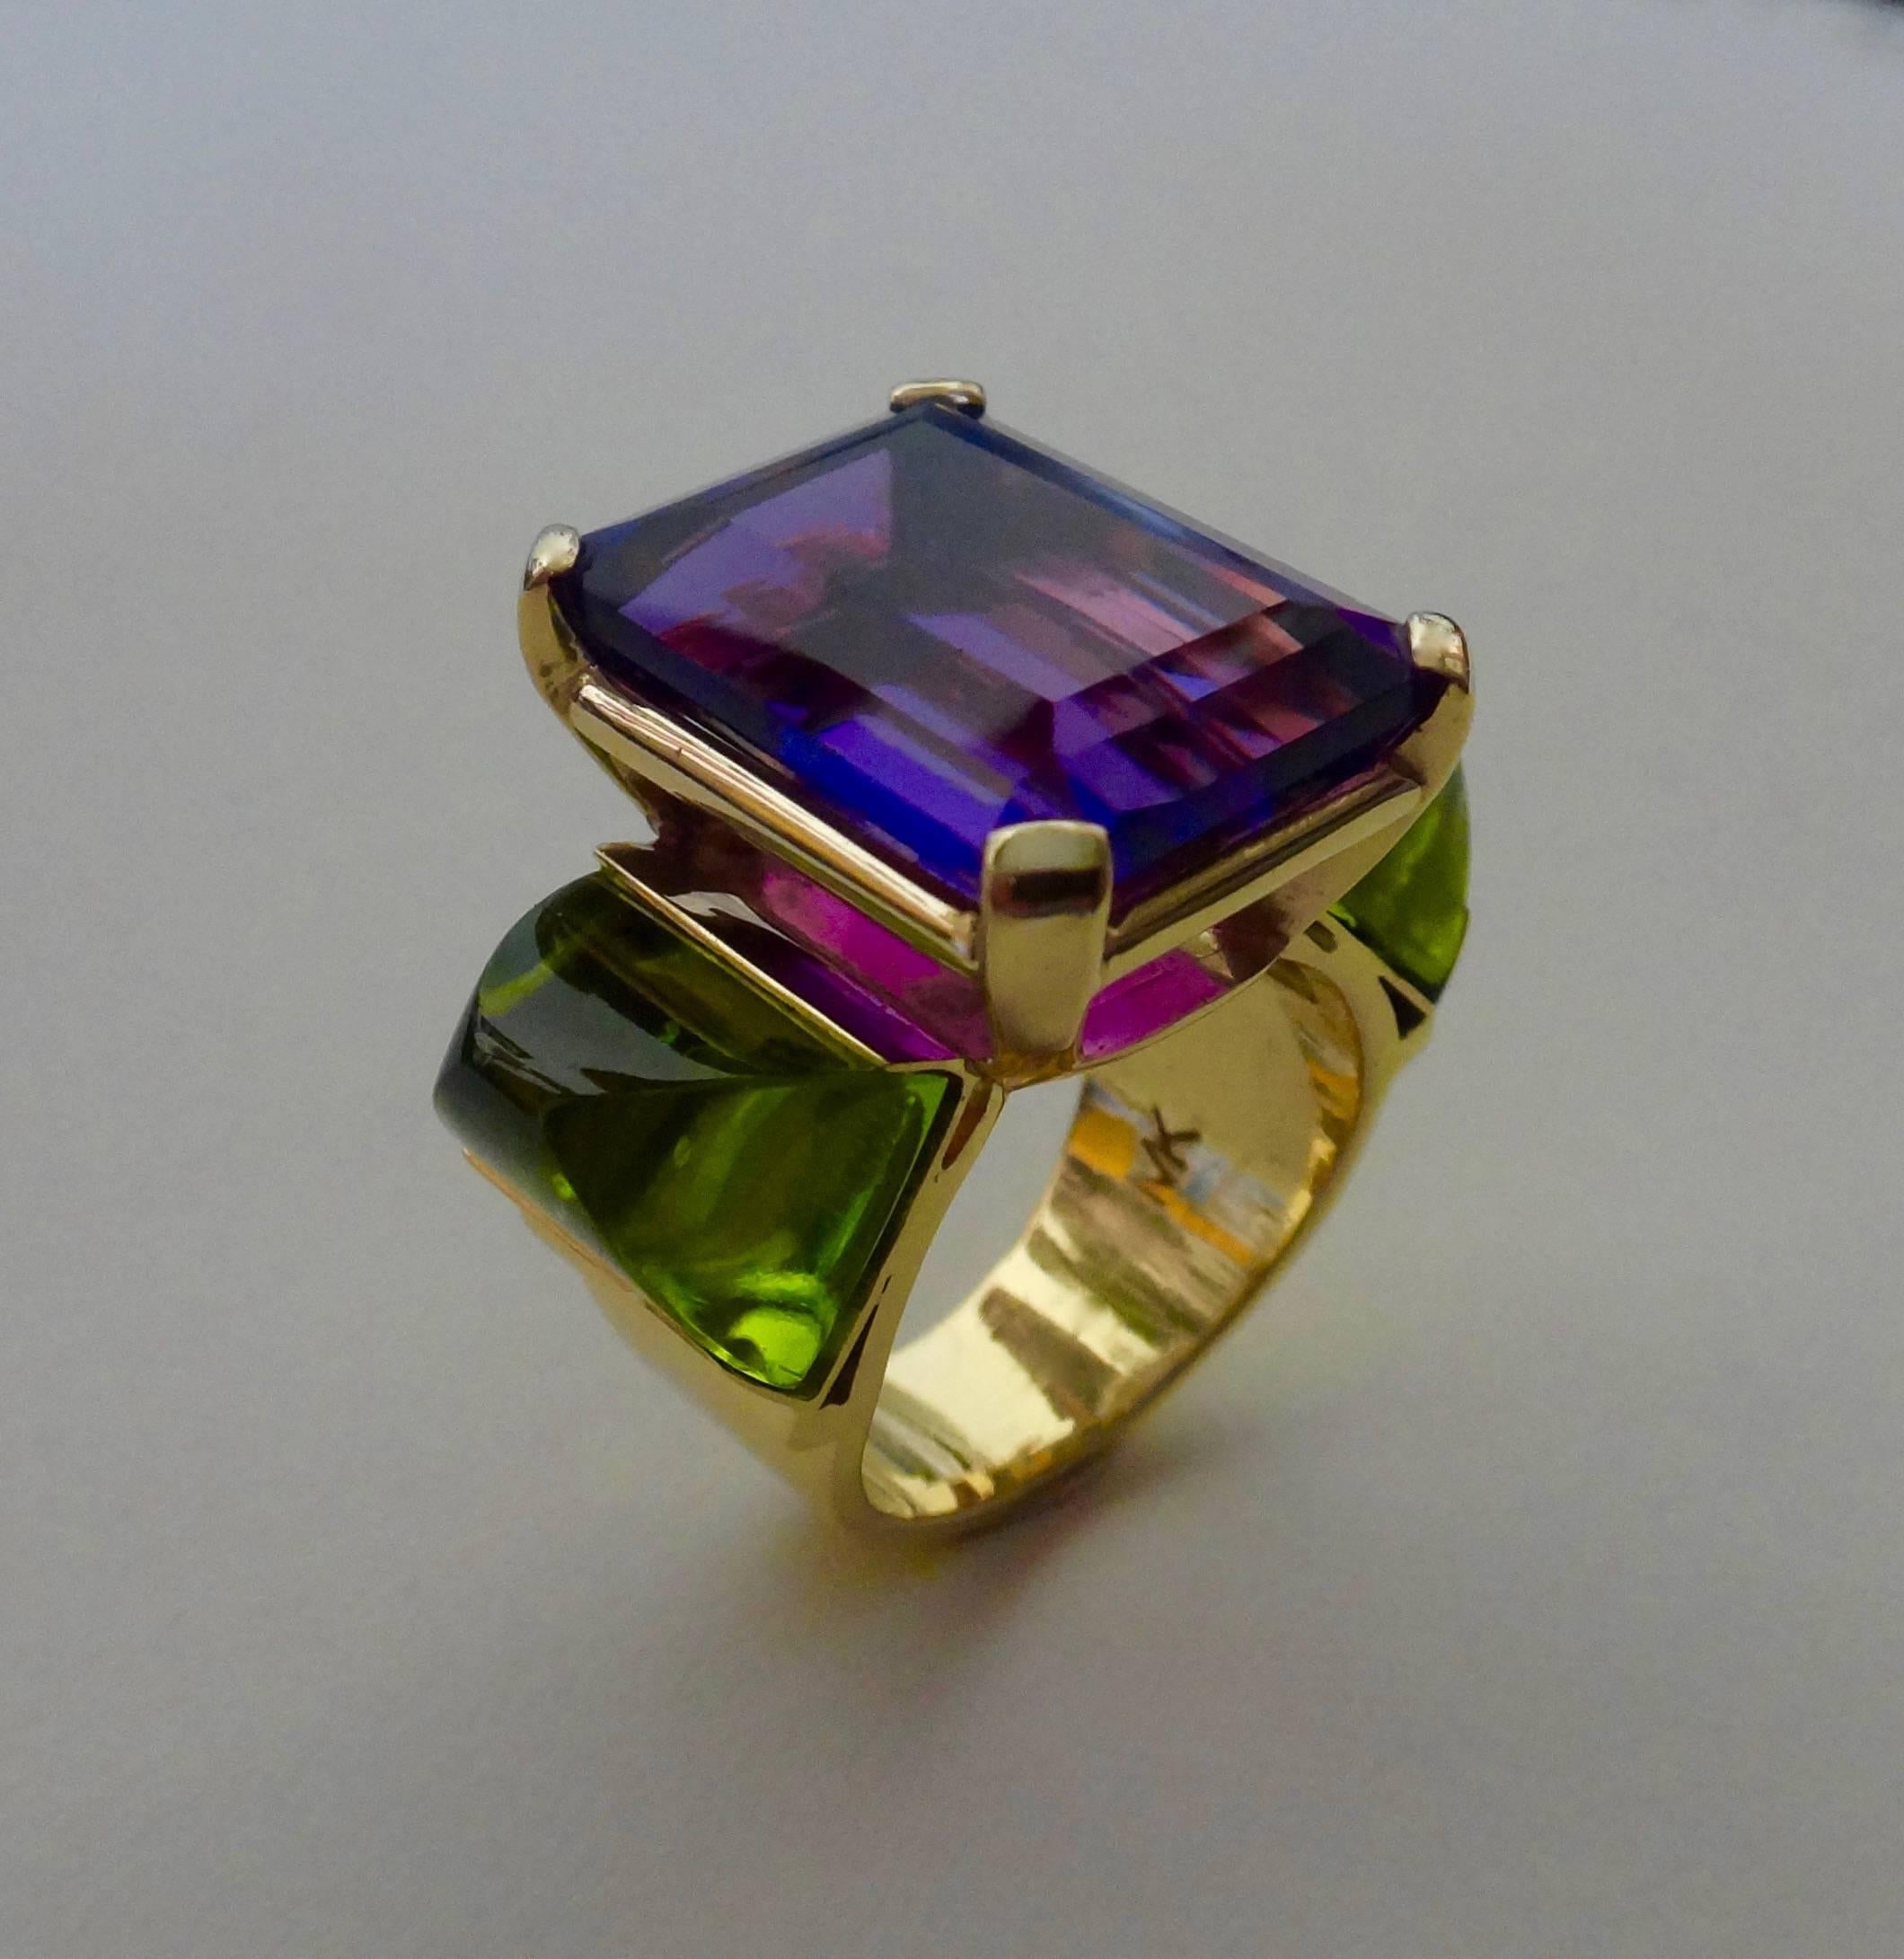 Set in this hand fabricated 18k yellow gold cocktail ring is an emerald cut African amethyst flanked by a pair of perfectly matched, sugarloaf cabochon peridots cut in Idar Oberstein, Germany.  The amethyst is a rich, deep purple color with flashes